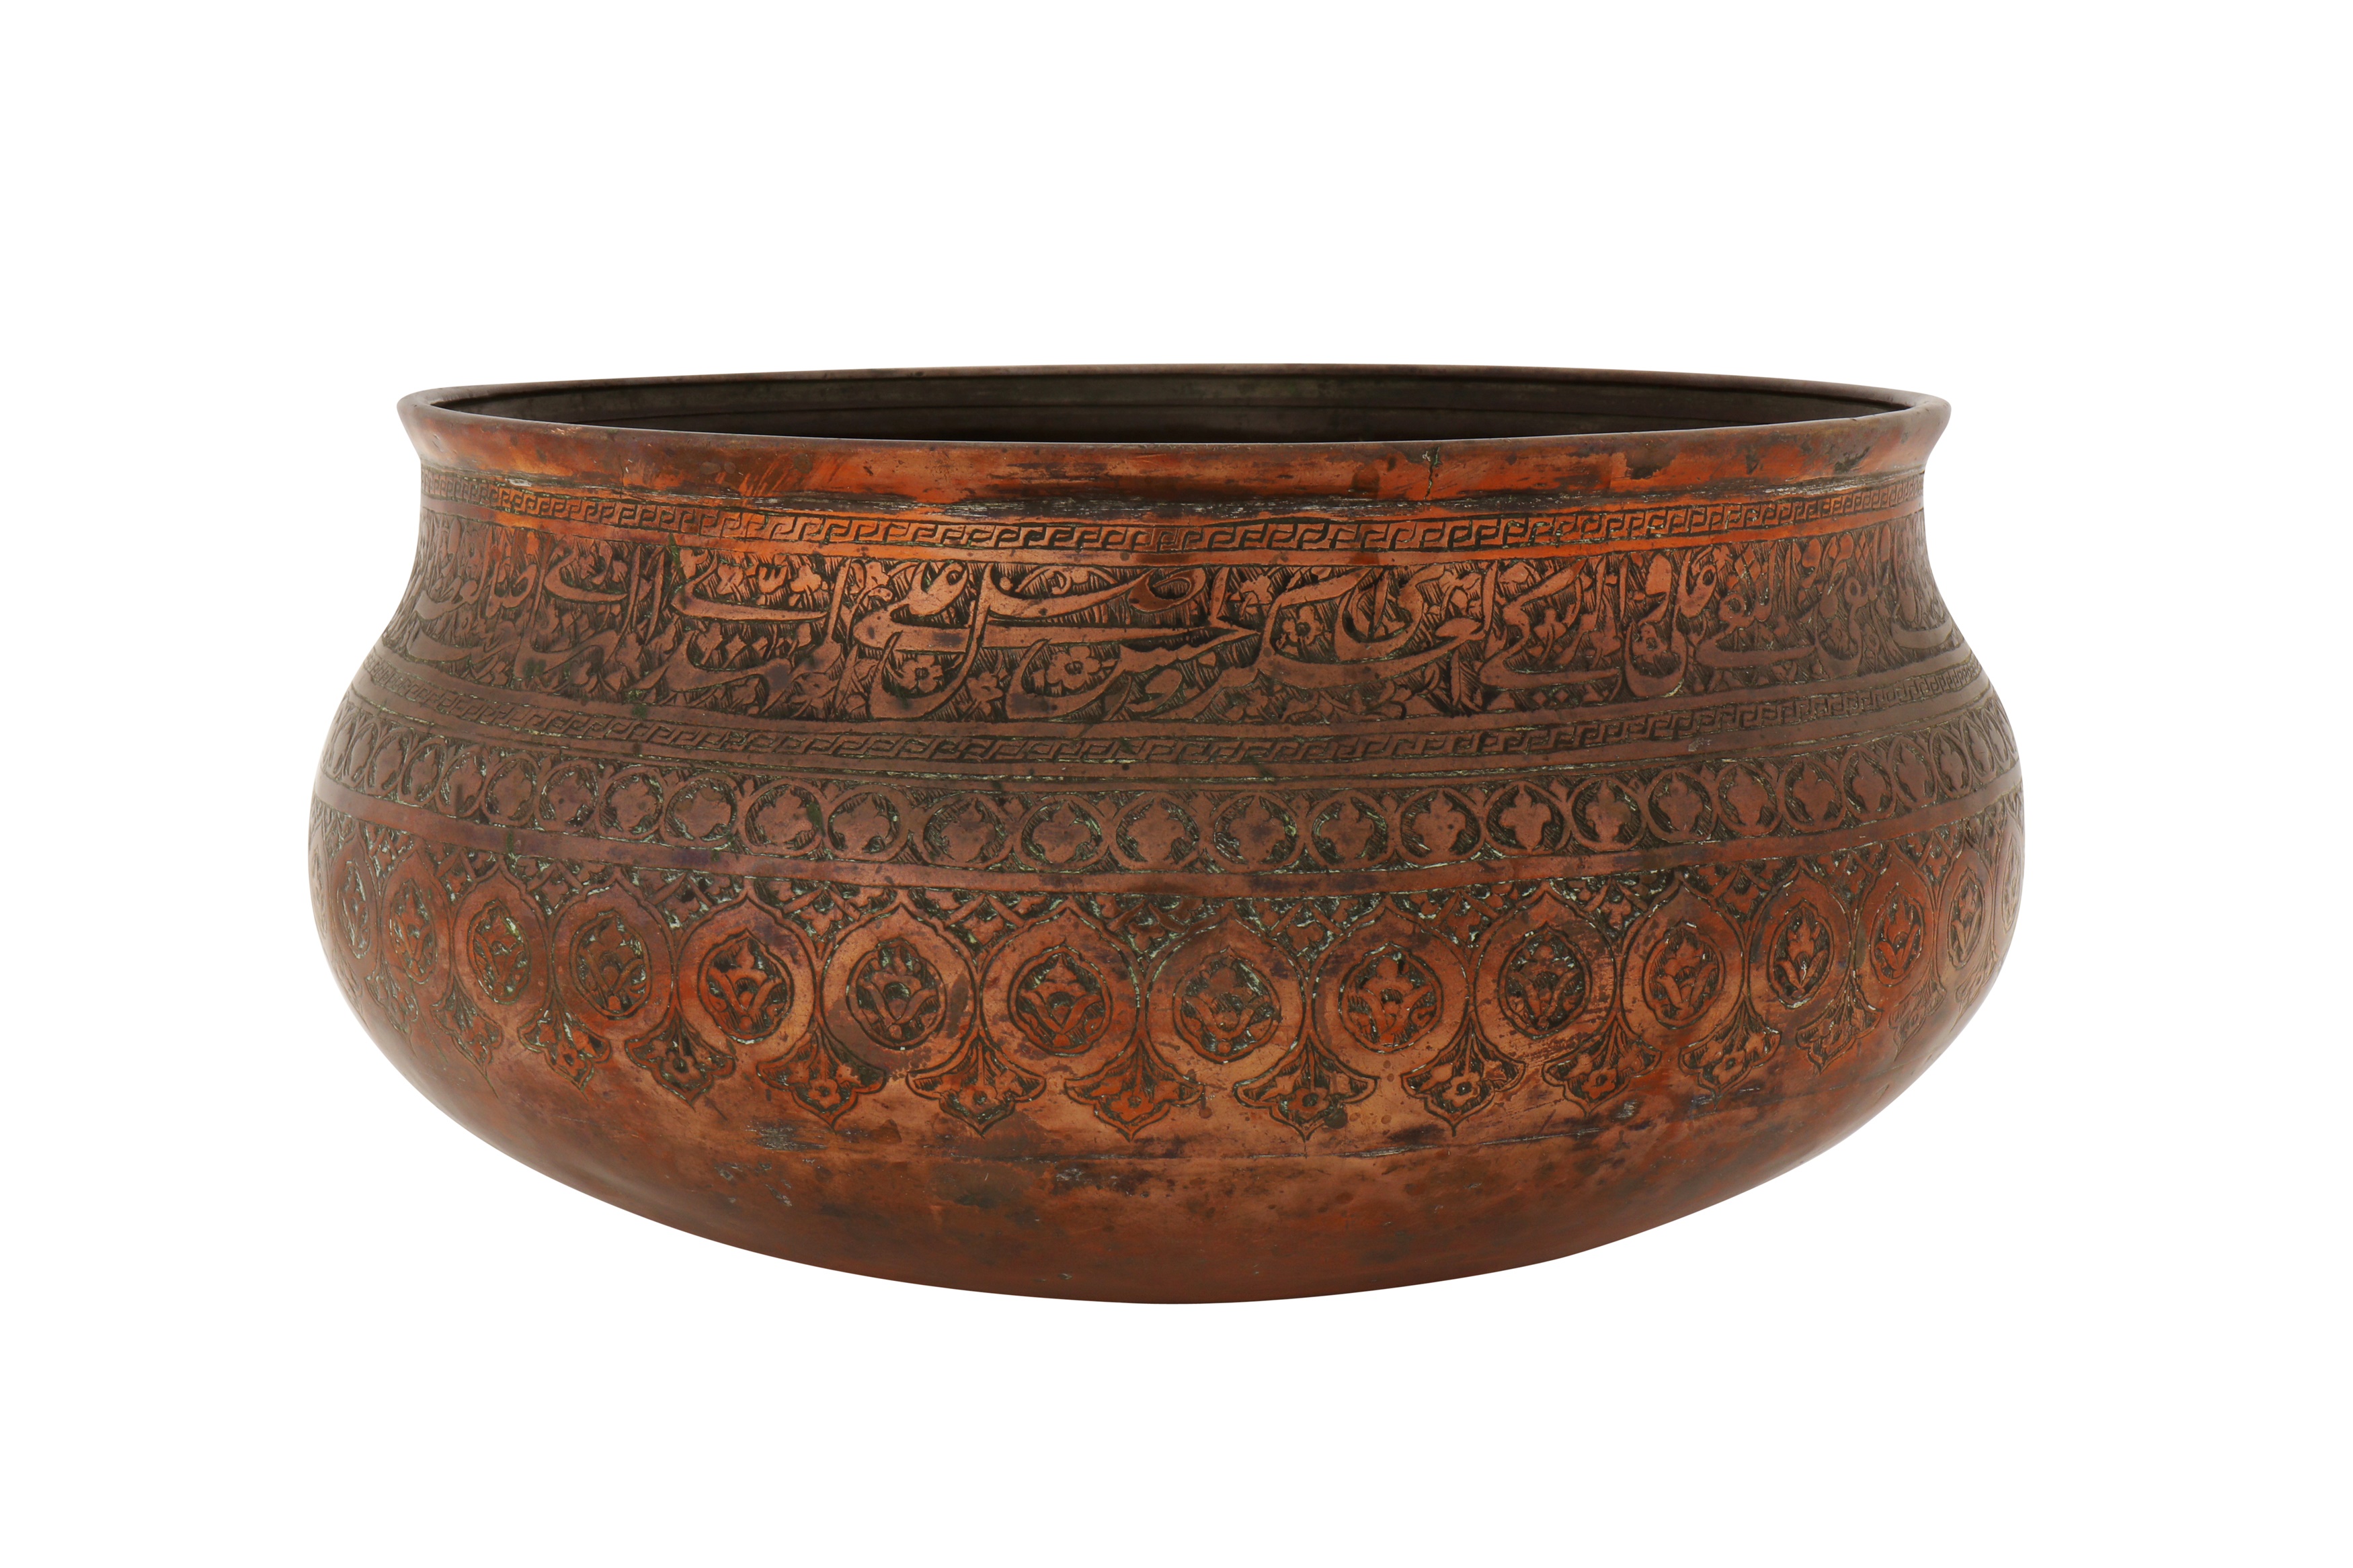 A 17TH CENTURY SAFAVID ENGRAVED TINNED COPPER TAS BOWL WITH THE NAMES OF THE 12 SHI'A IMAMS - Image 2 of 4